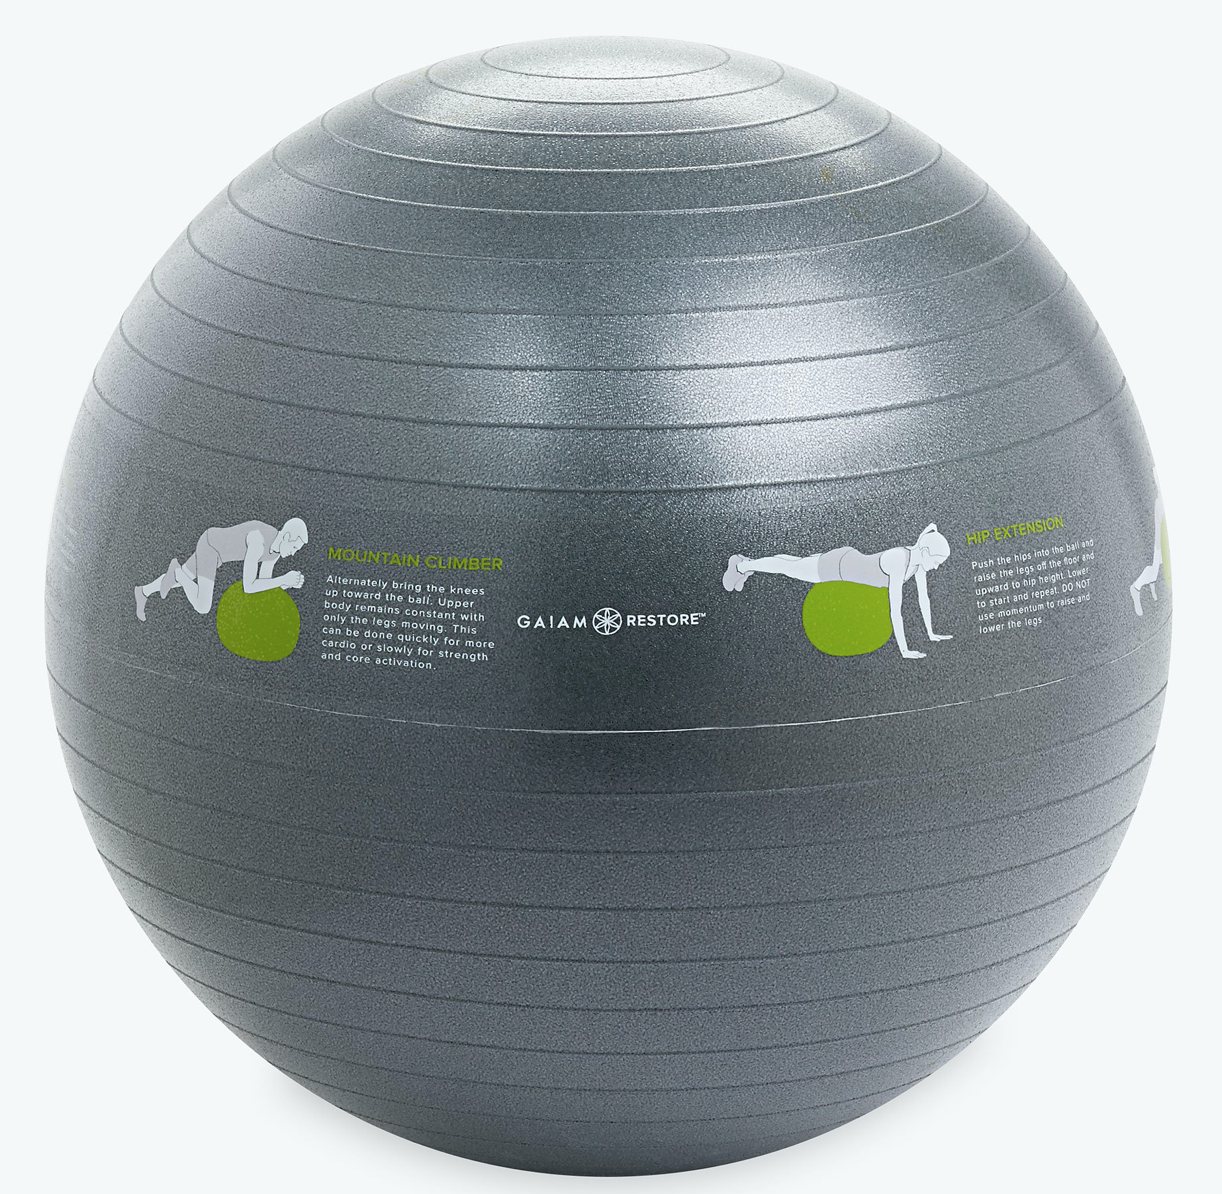 RESTORE SELF-GUIDED STABILITY BALL